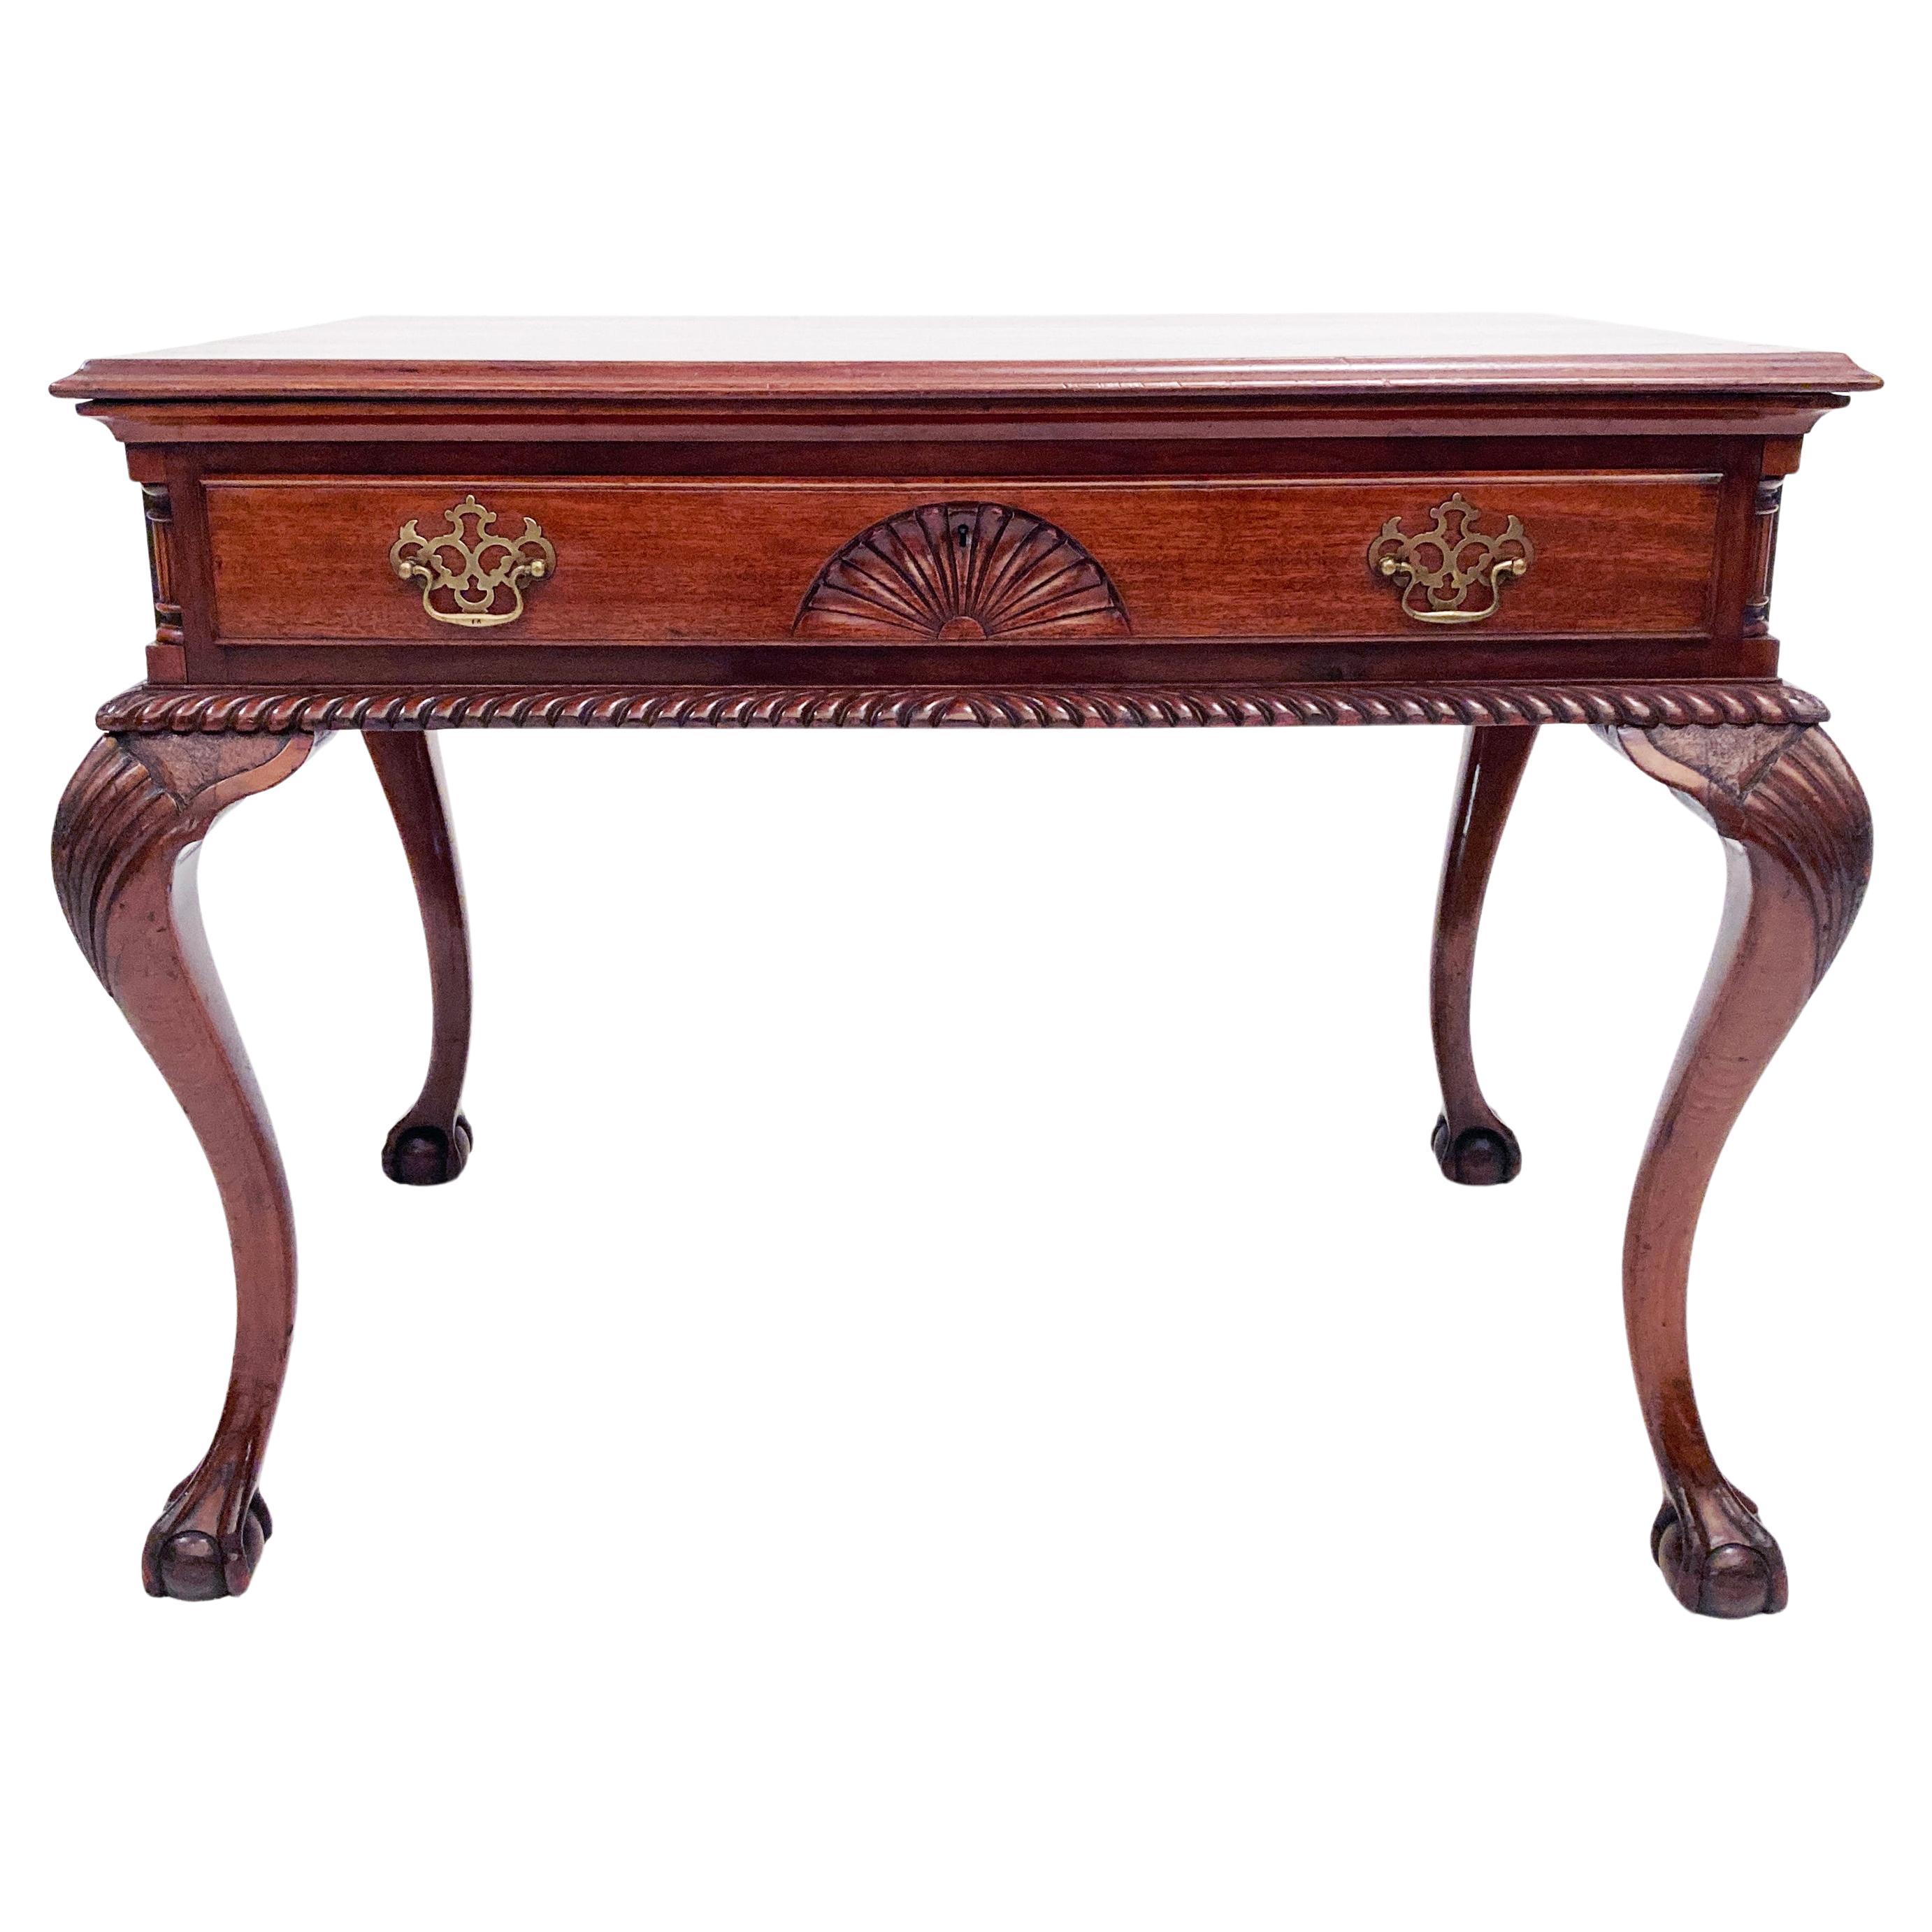 Single Drawer Mahogany Chippendale Table Ball Claw Feet English Mid 19th Century For Sale